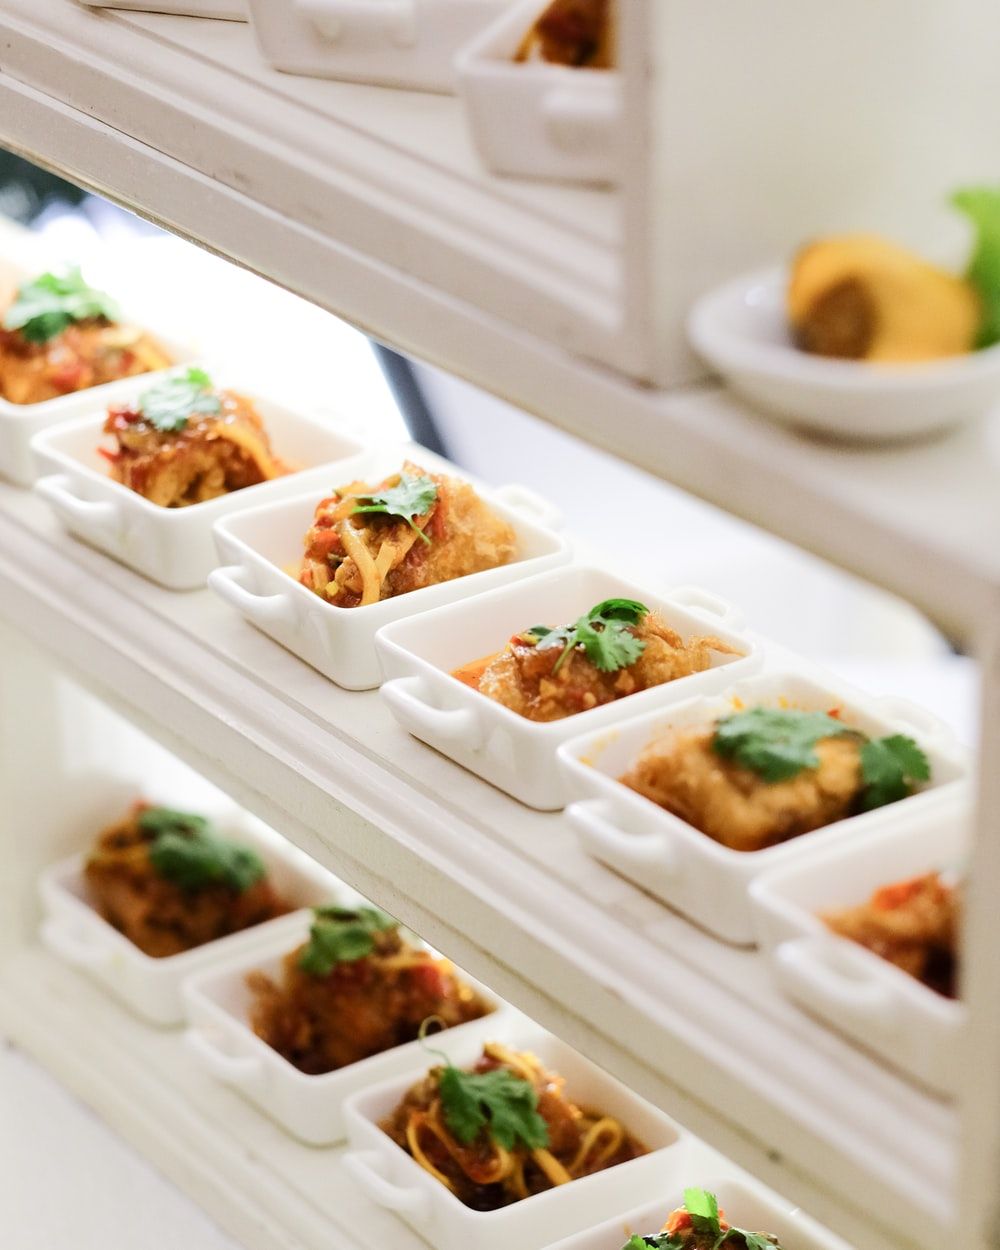 Catering Picture. Download Free Image